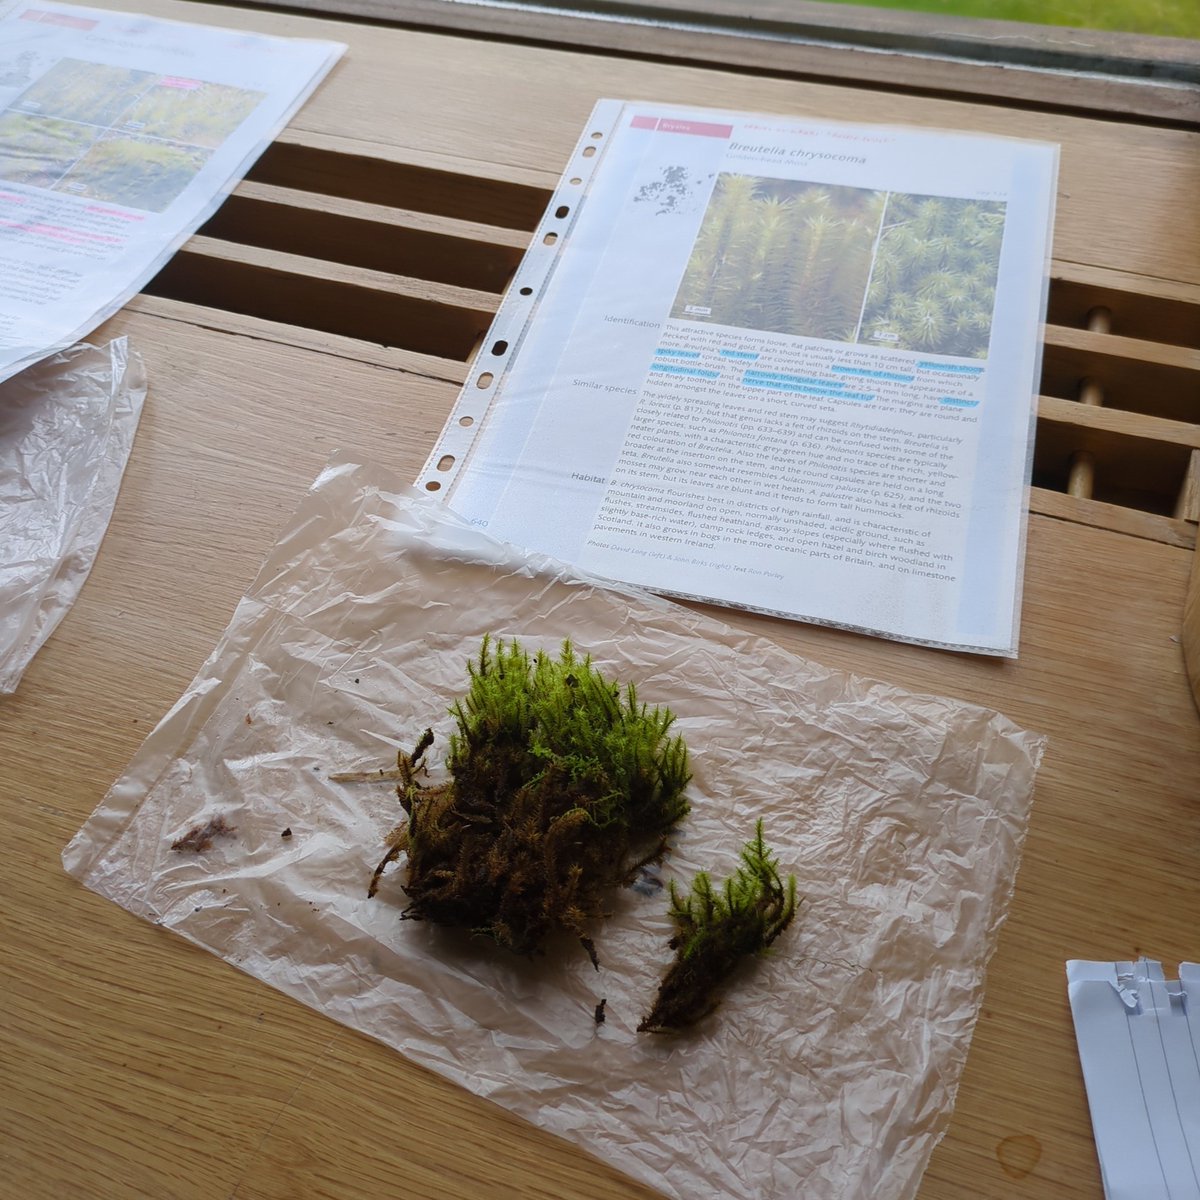 Bryophyte workshop with Dr. Joanne Denyer at the BSBI Irish Autumn Meeting. #BSBIAutumnMeeting #Bryophytes